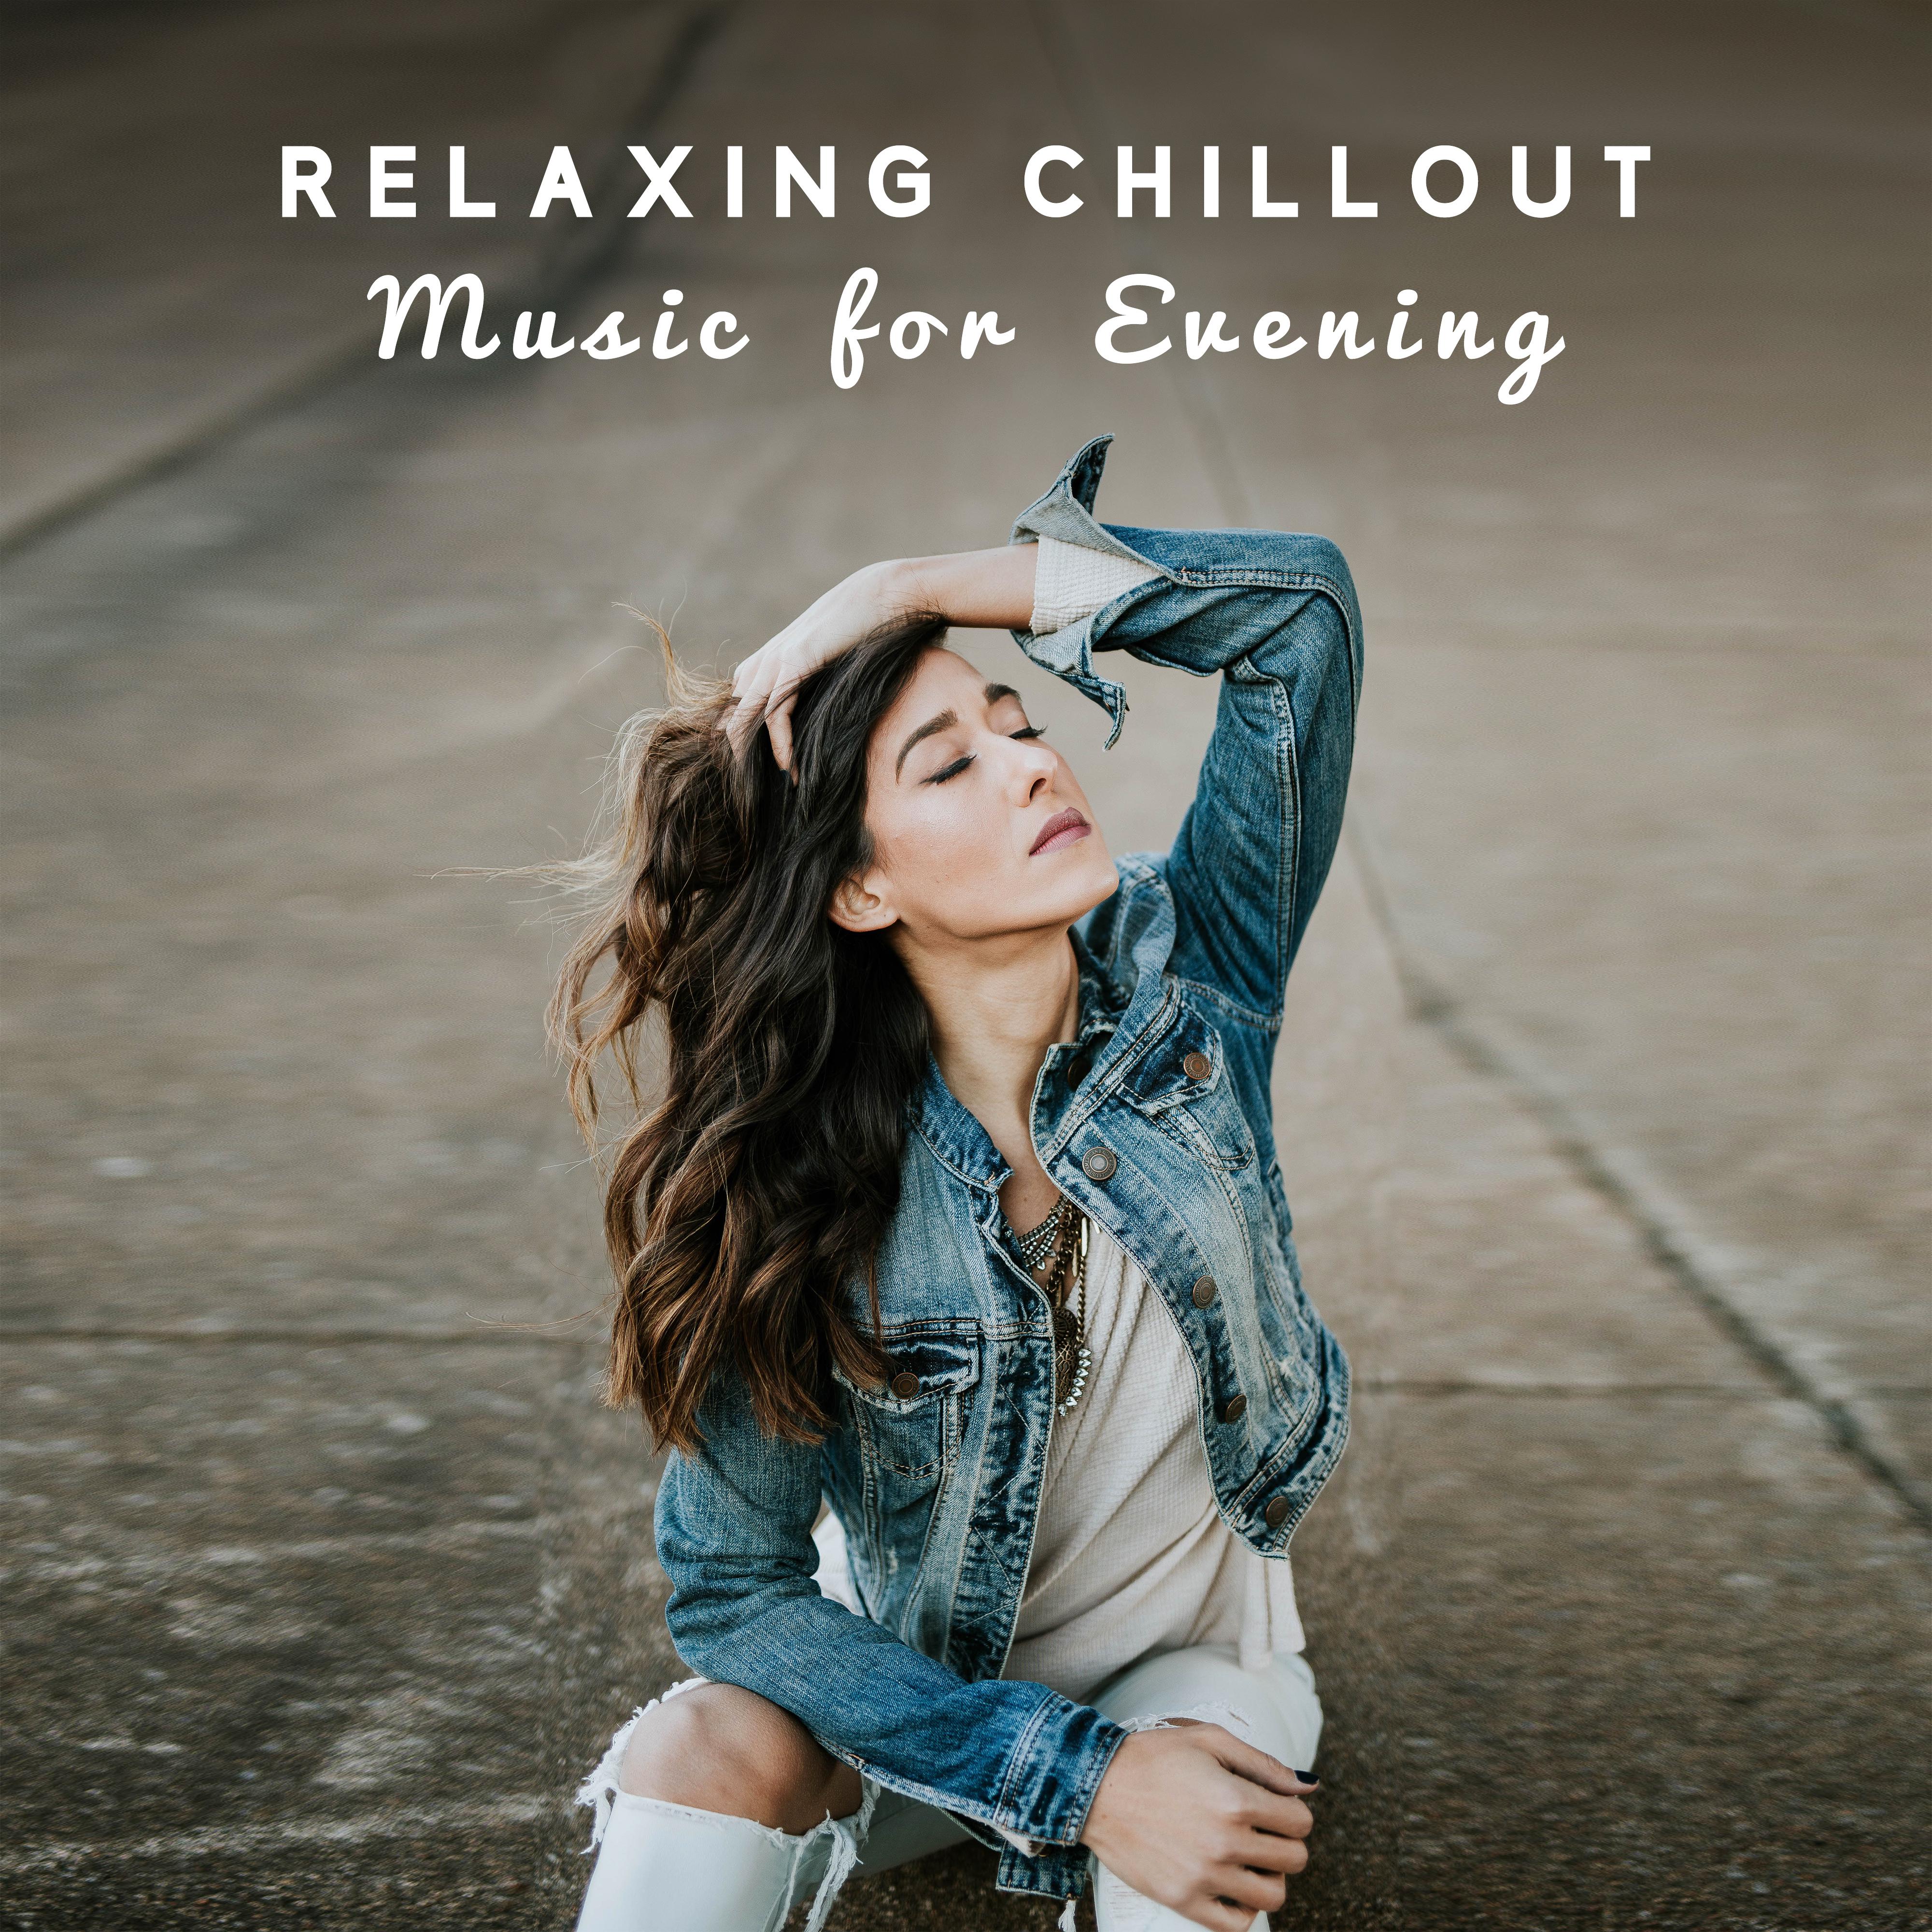 Relaxing Chillout Music for Evening